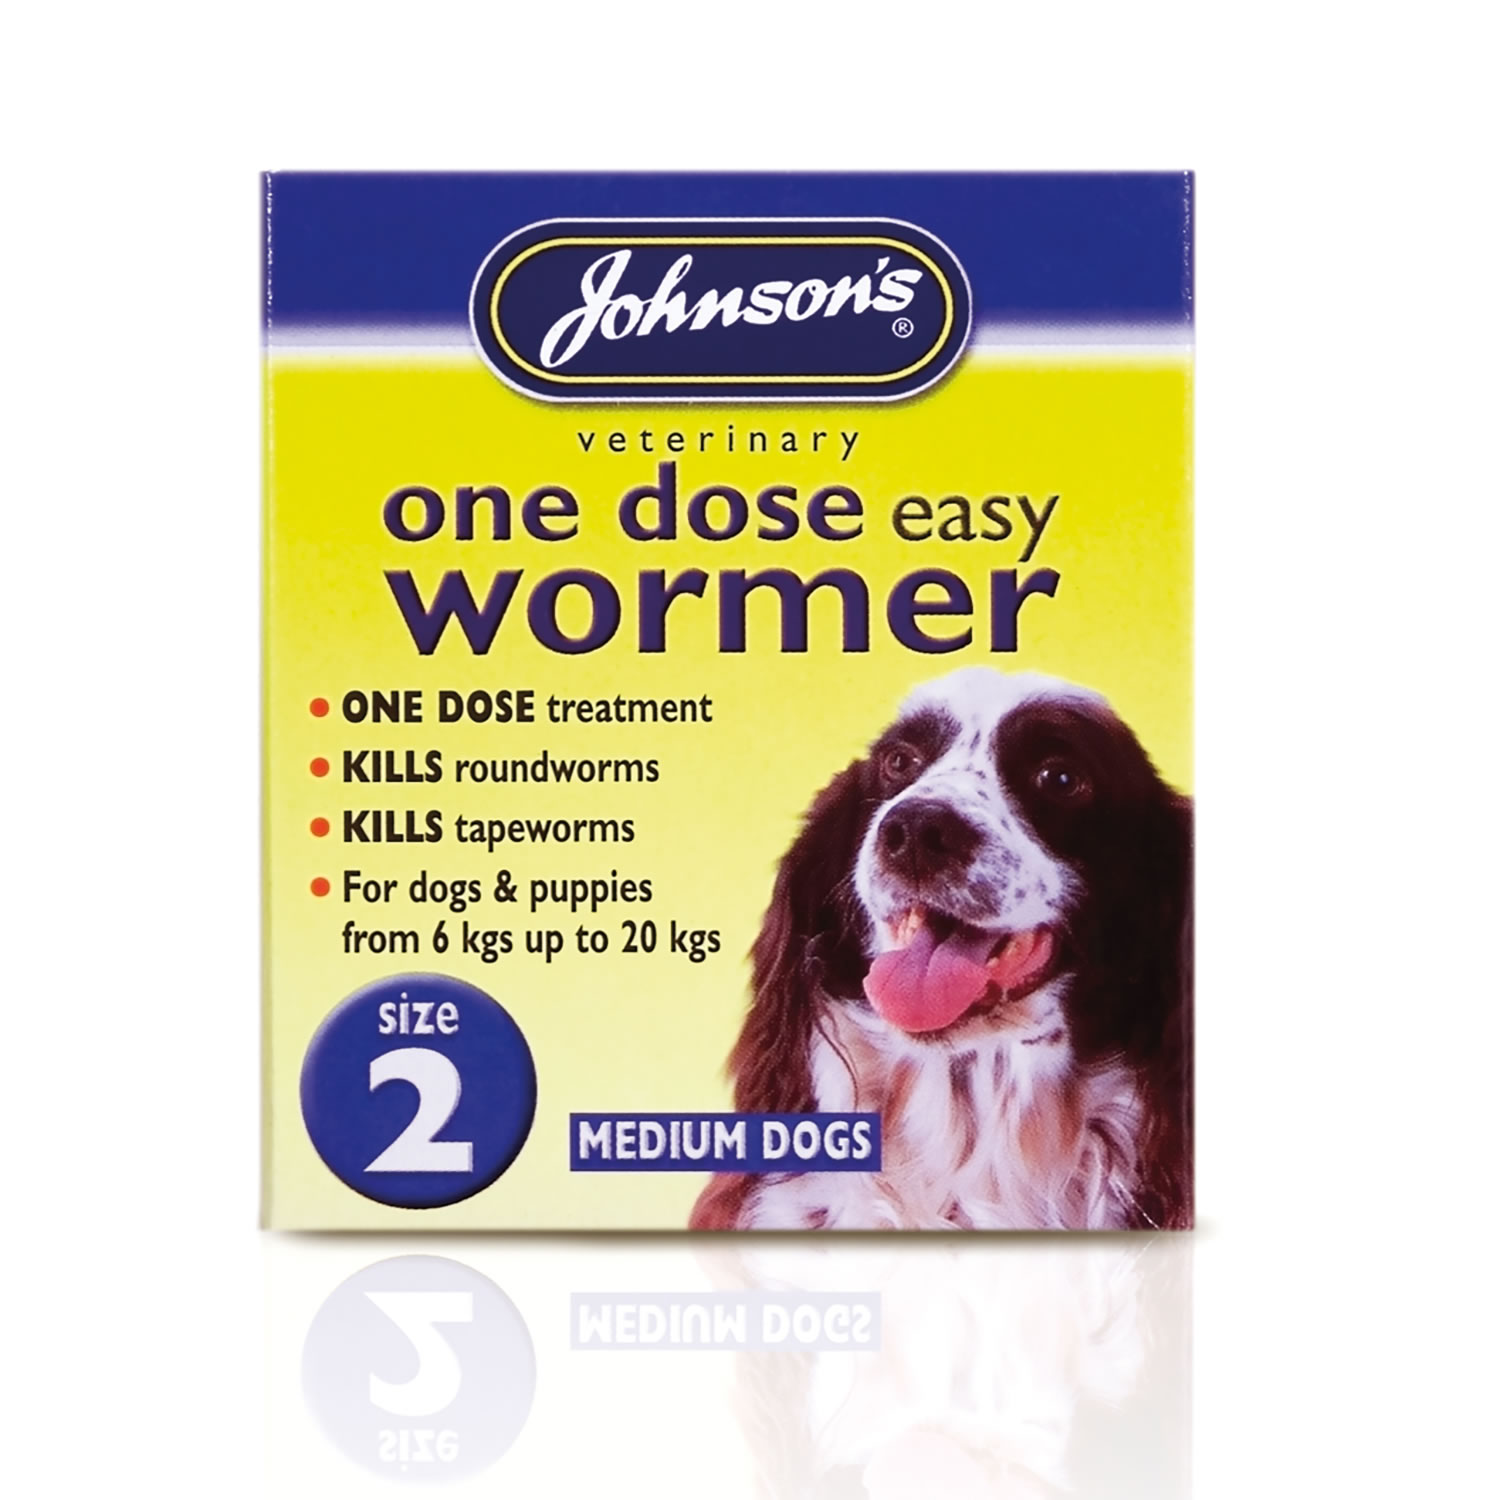 JOHNSON'S VETERINARY EASY WORMER ONE DOSE FOR DOGS SIZE TWO EACH 2 TABLETS